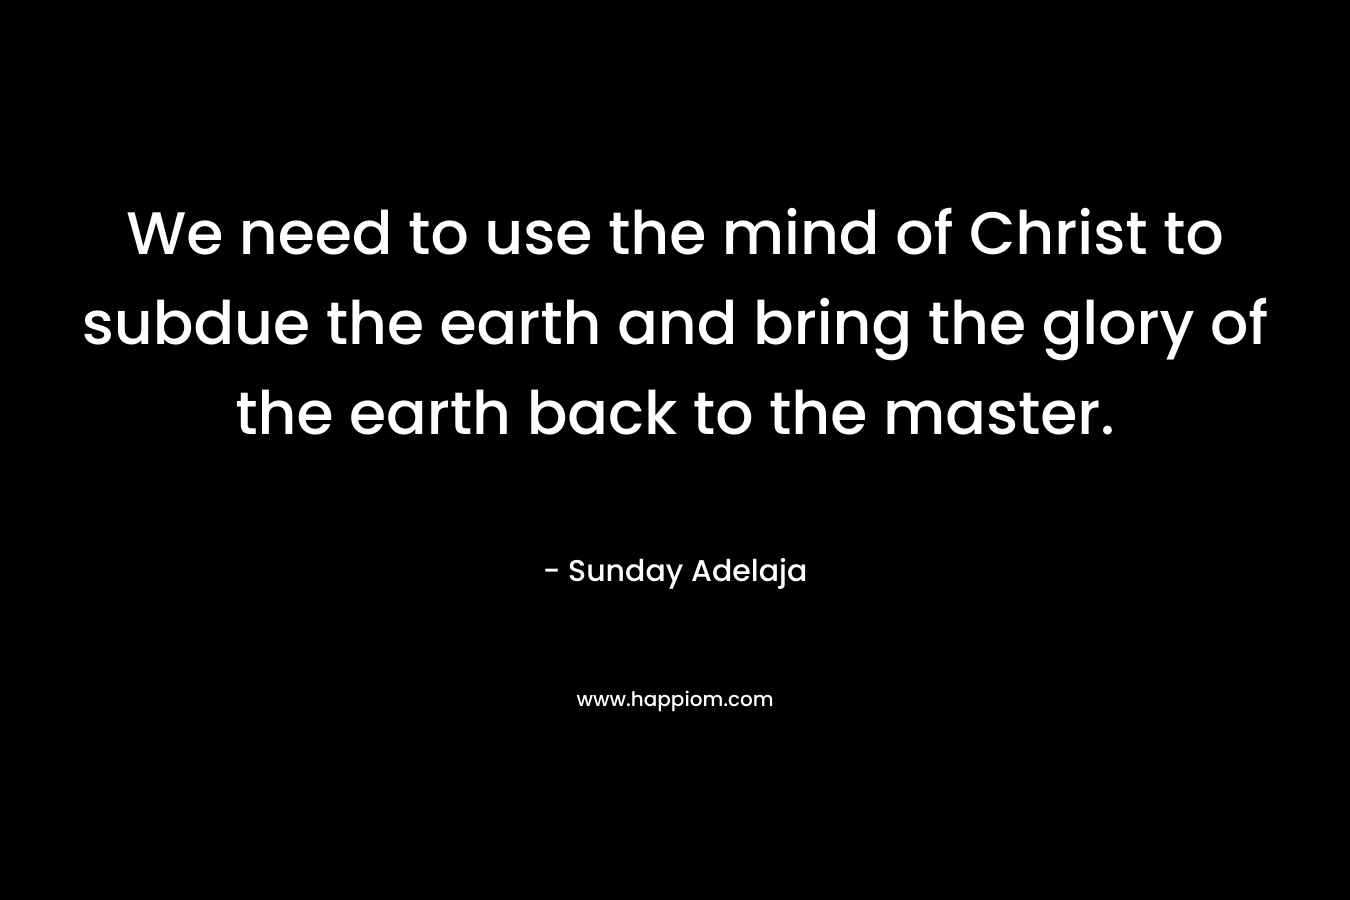 We need to use the mind of Christ to subdue the earth and bring the glory of the earth back to the master.